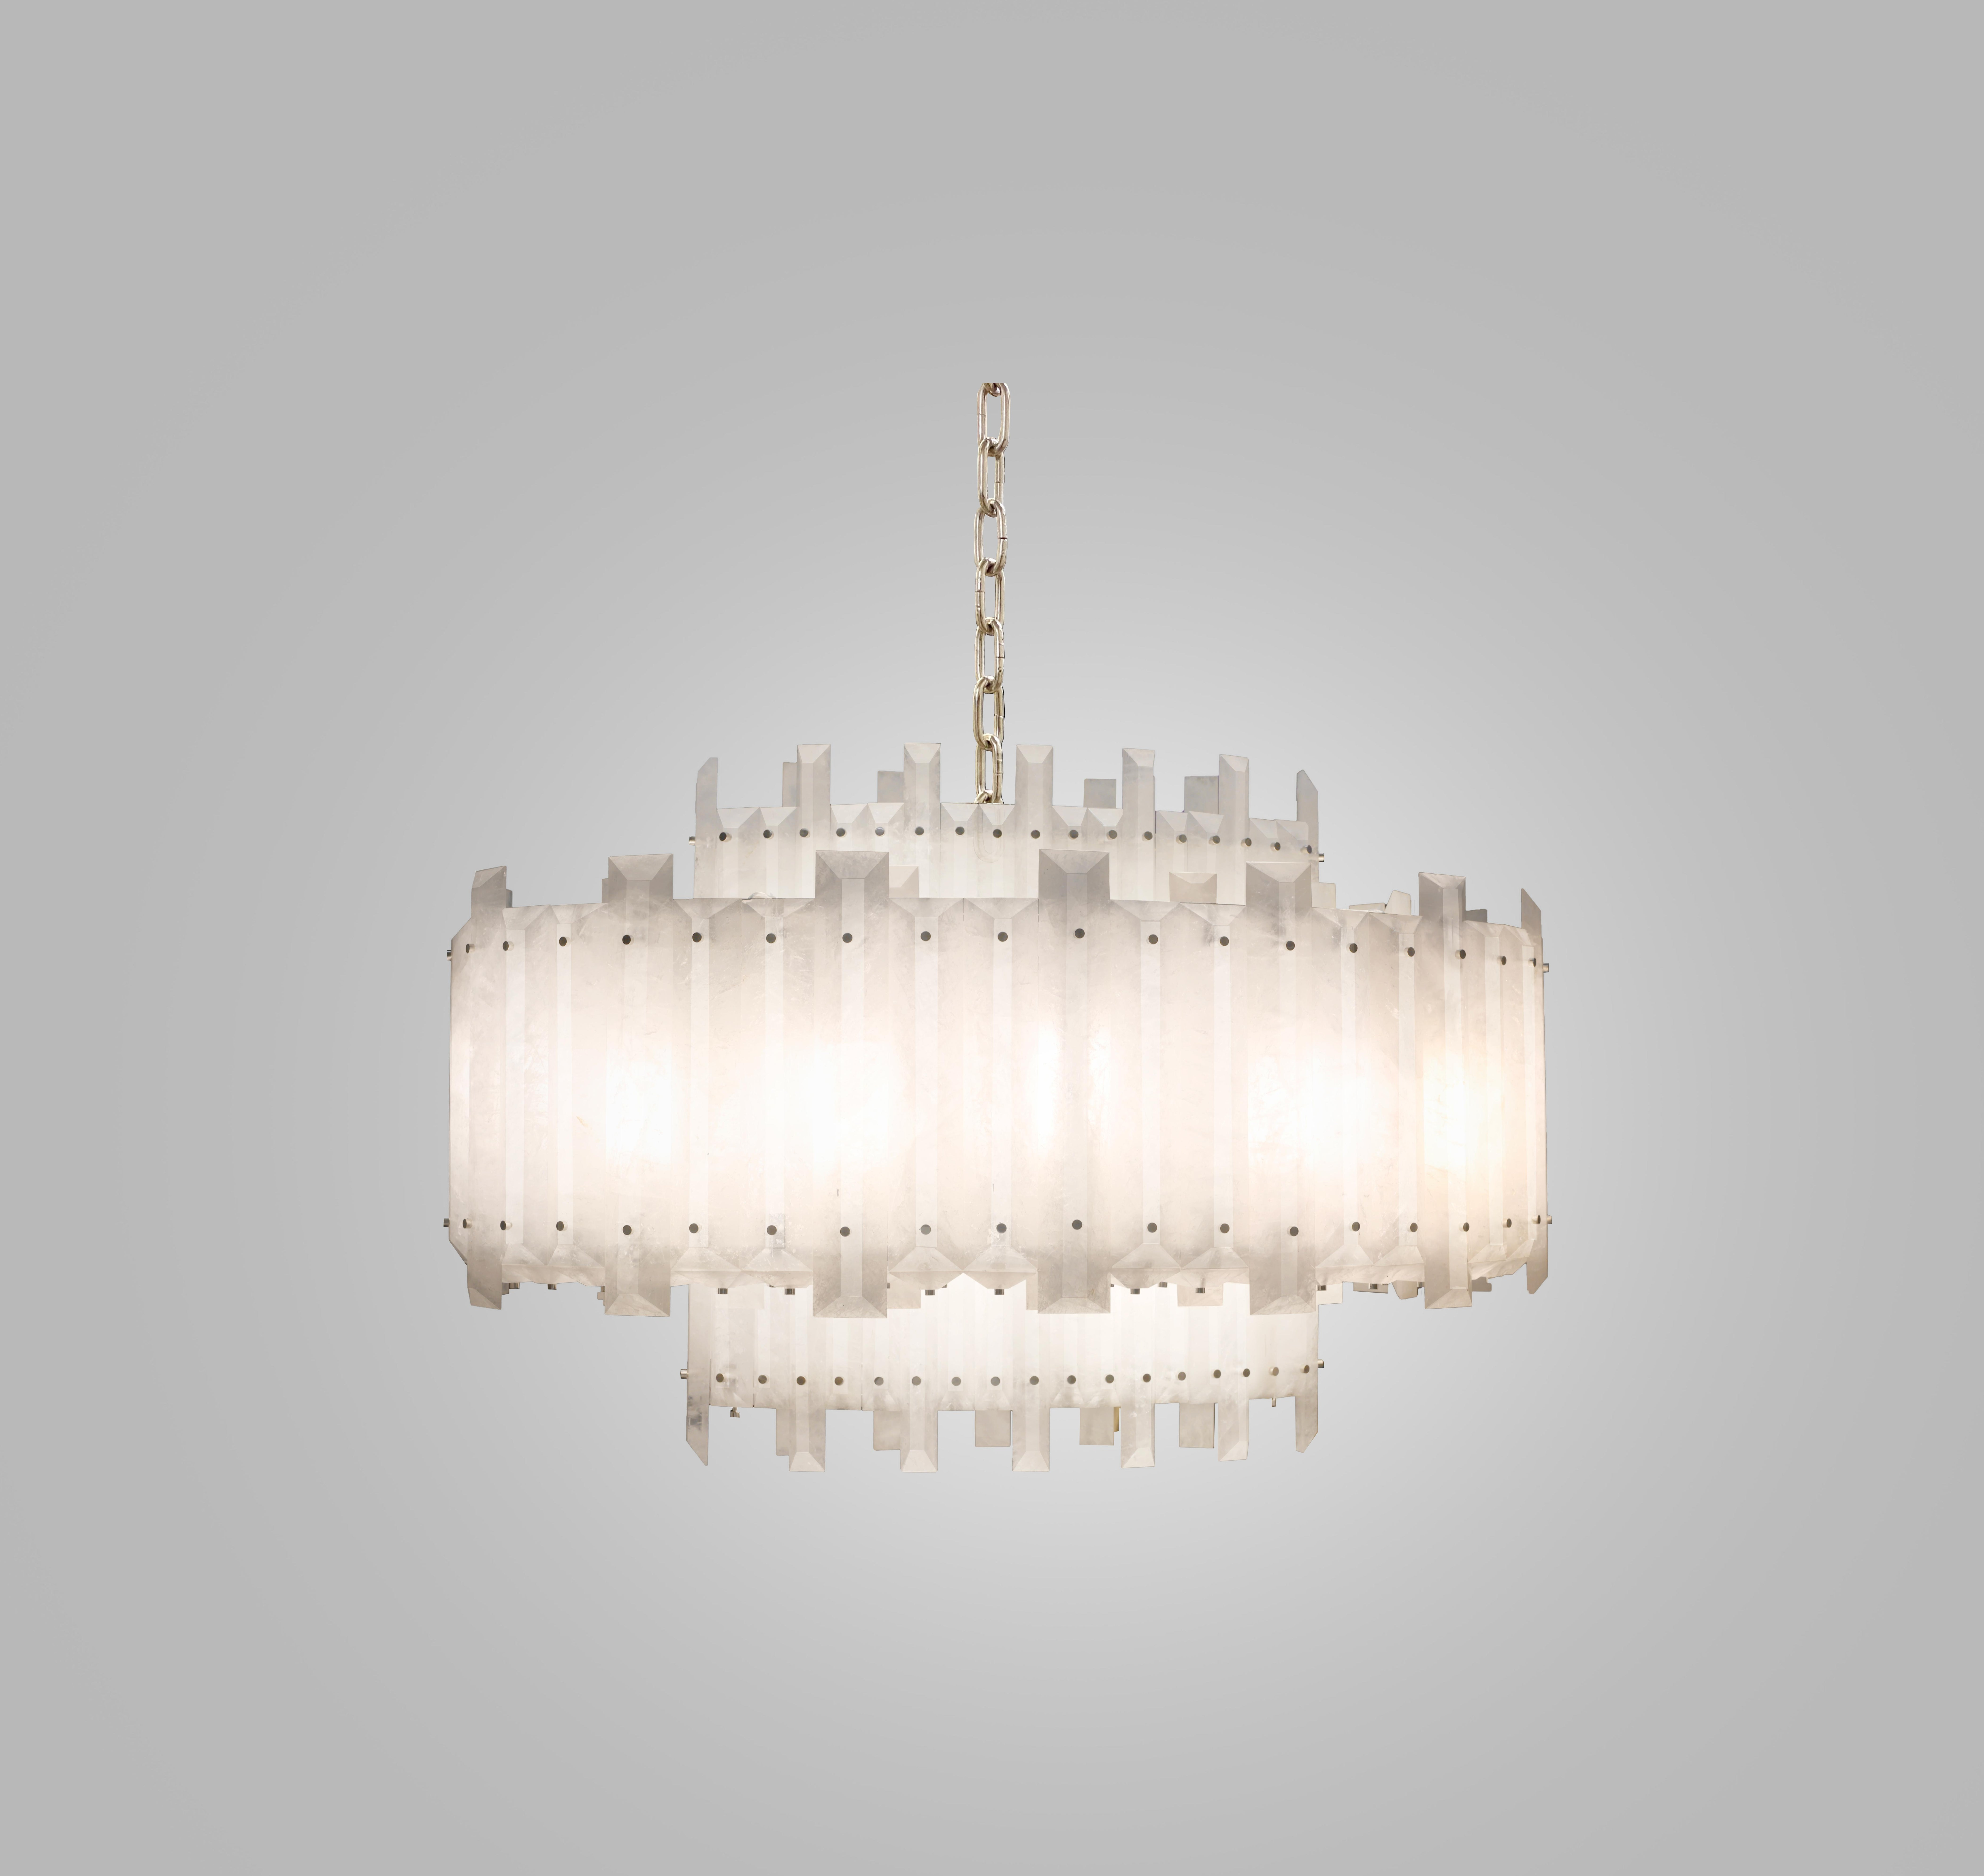 Oval form rock crystal chandelier with center section and nickel decoration. Finely carved, multi-faceted rock crystal panels installed around the circumference of the circle. Hung from a finely cast polished brass chain. 

Overall height can be